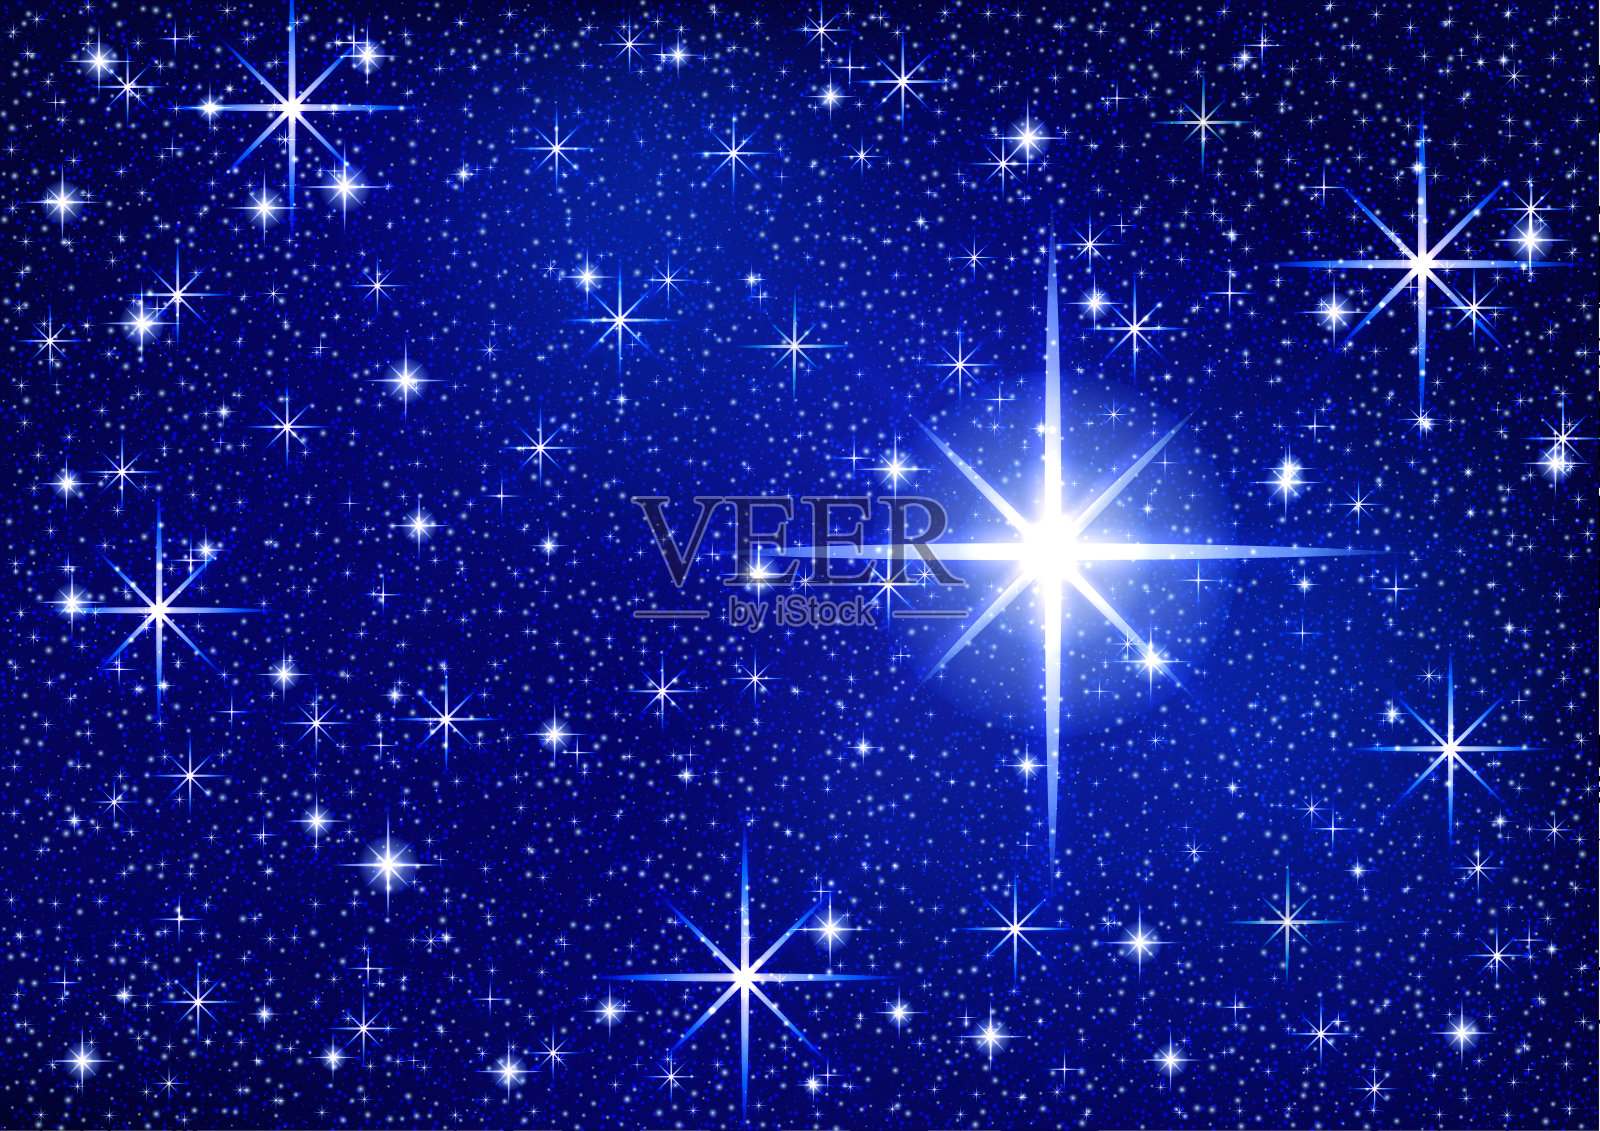 Starry sparkle vector background with twinkle stars. Сlean night blue sky for holiday插画图片素材